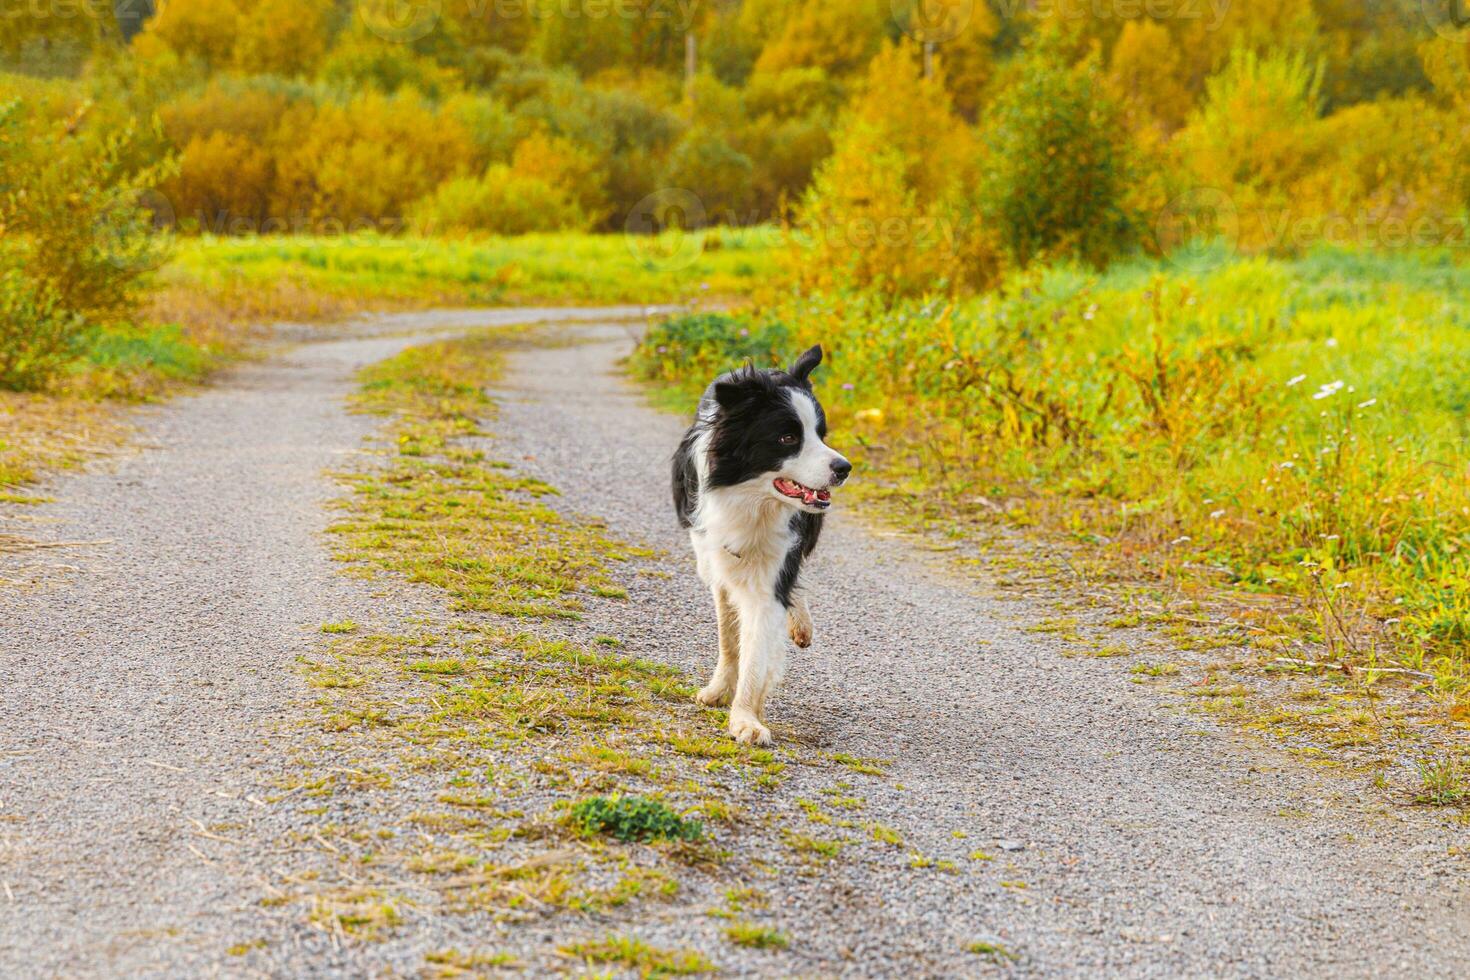 Outdoor portrait of cute smiling puppy border collie running in autumn park outdoor. Little dog with funny face on walking in sunny autumn fall day. Hello Autumn cold weather concept. photo